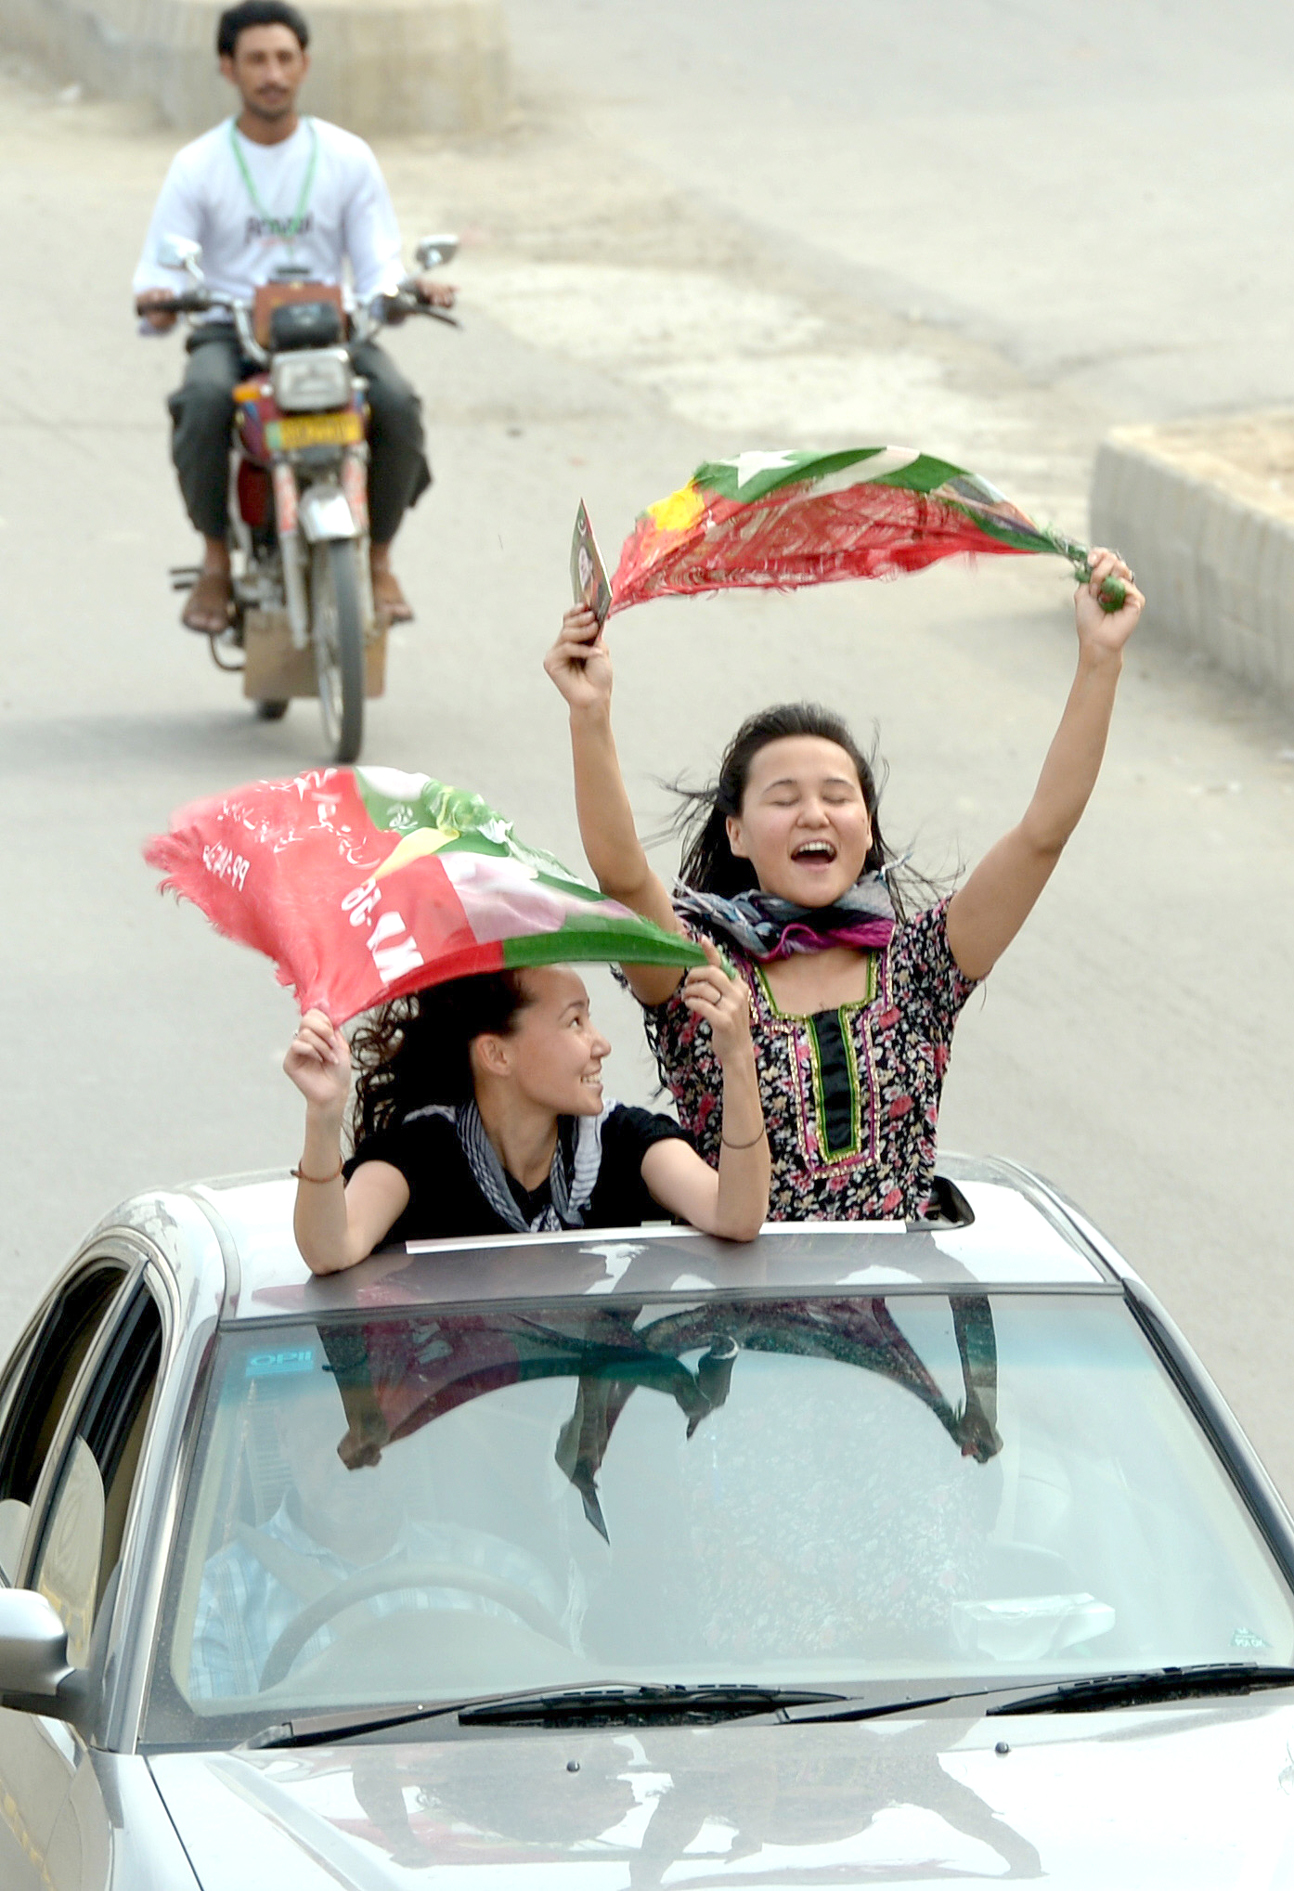 activists of pakistan tehreek e insaf pti wave party flags as they drive through the streets during the general election in rawalpindi on may 11 2013 photo afp